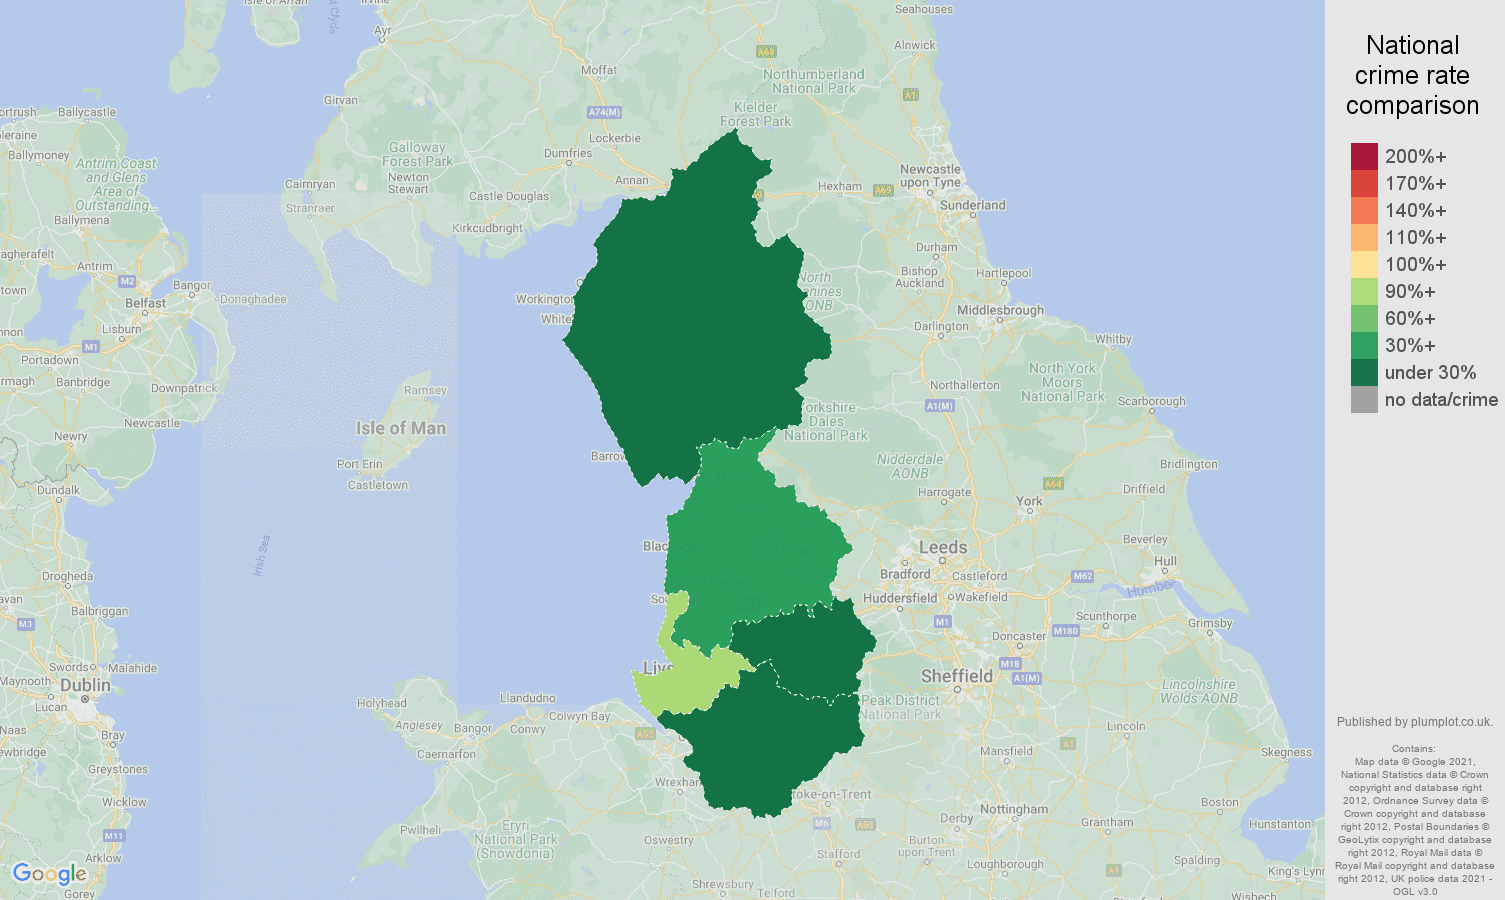 North West theft from the person crime rate comparison map